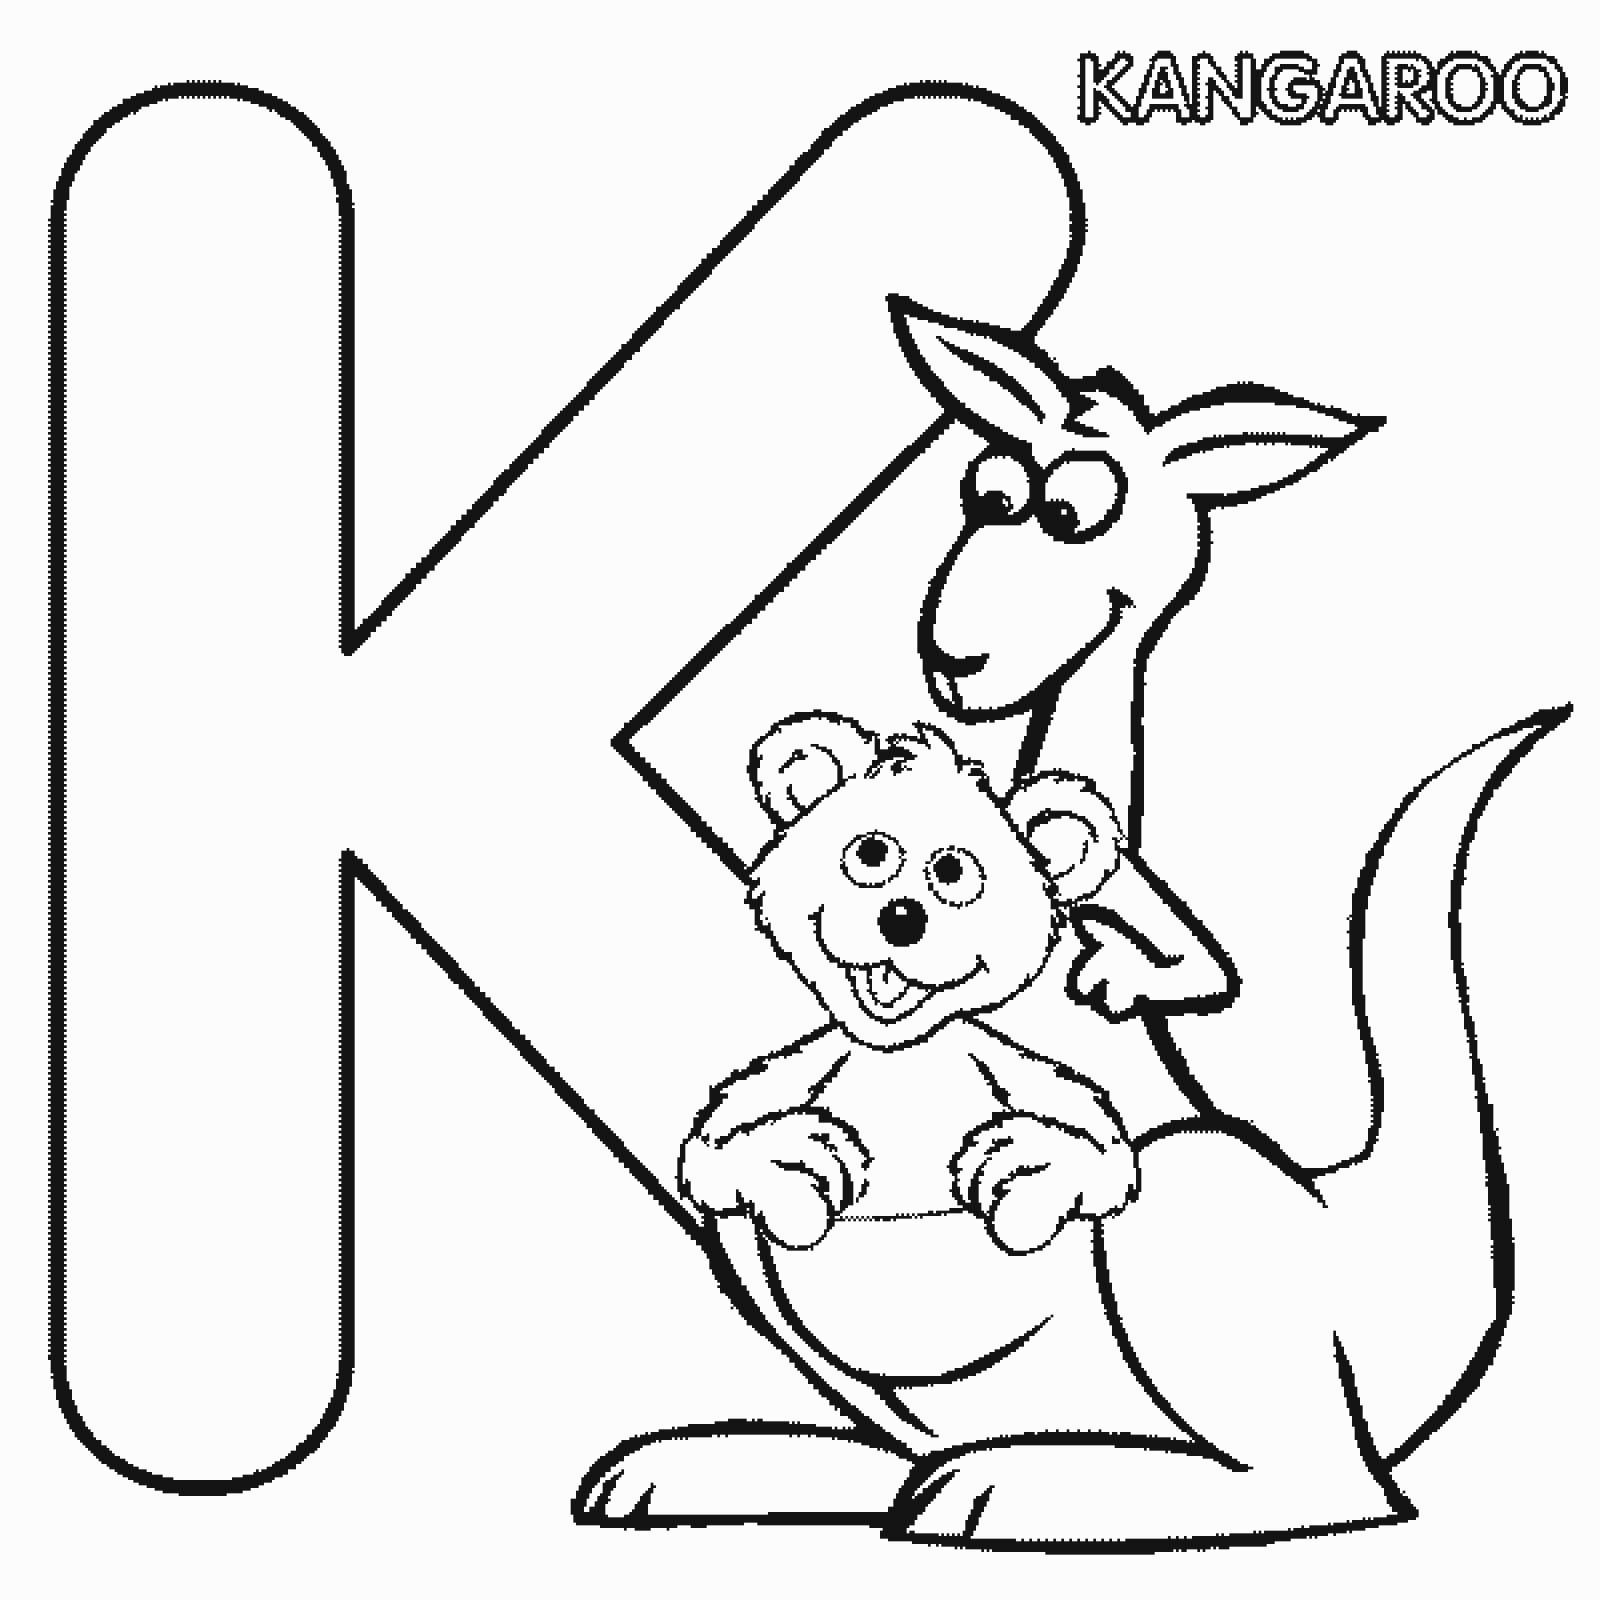 abc-coloring-pages-9 - ColoringPagehub